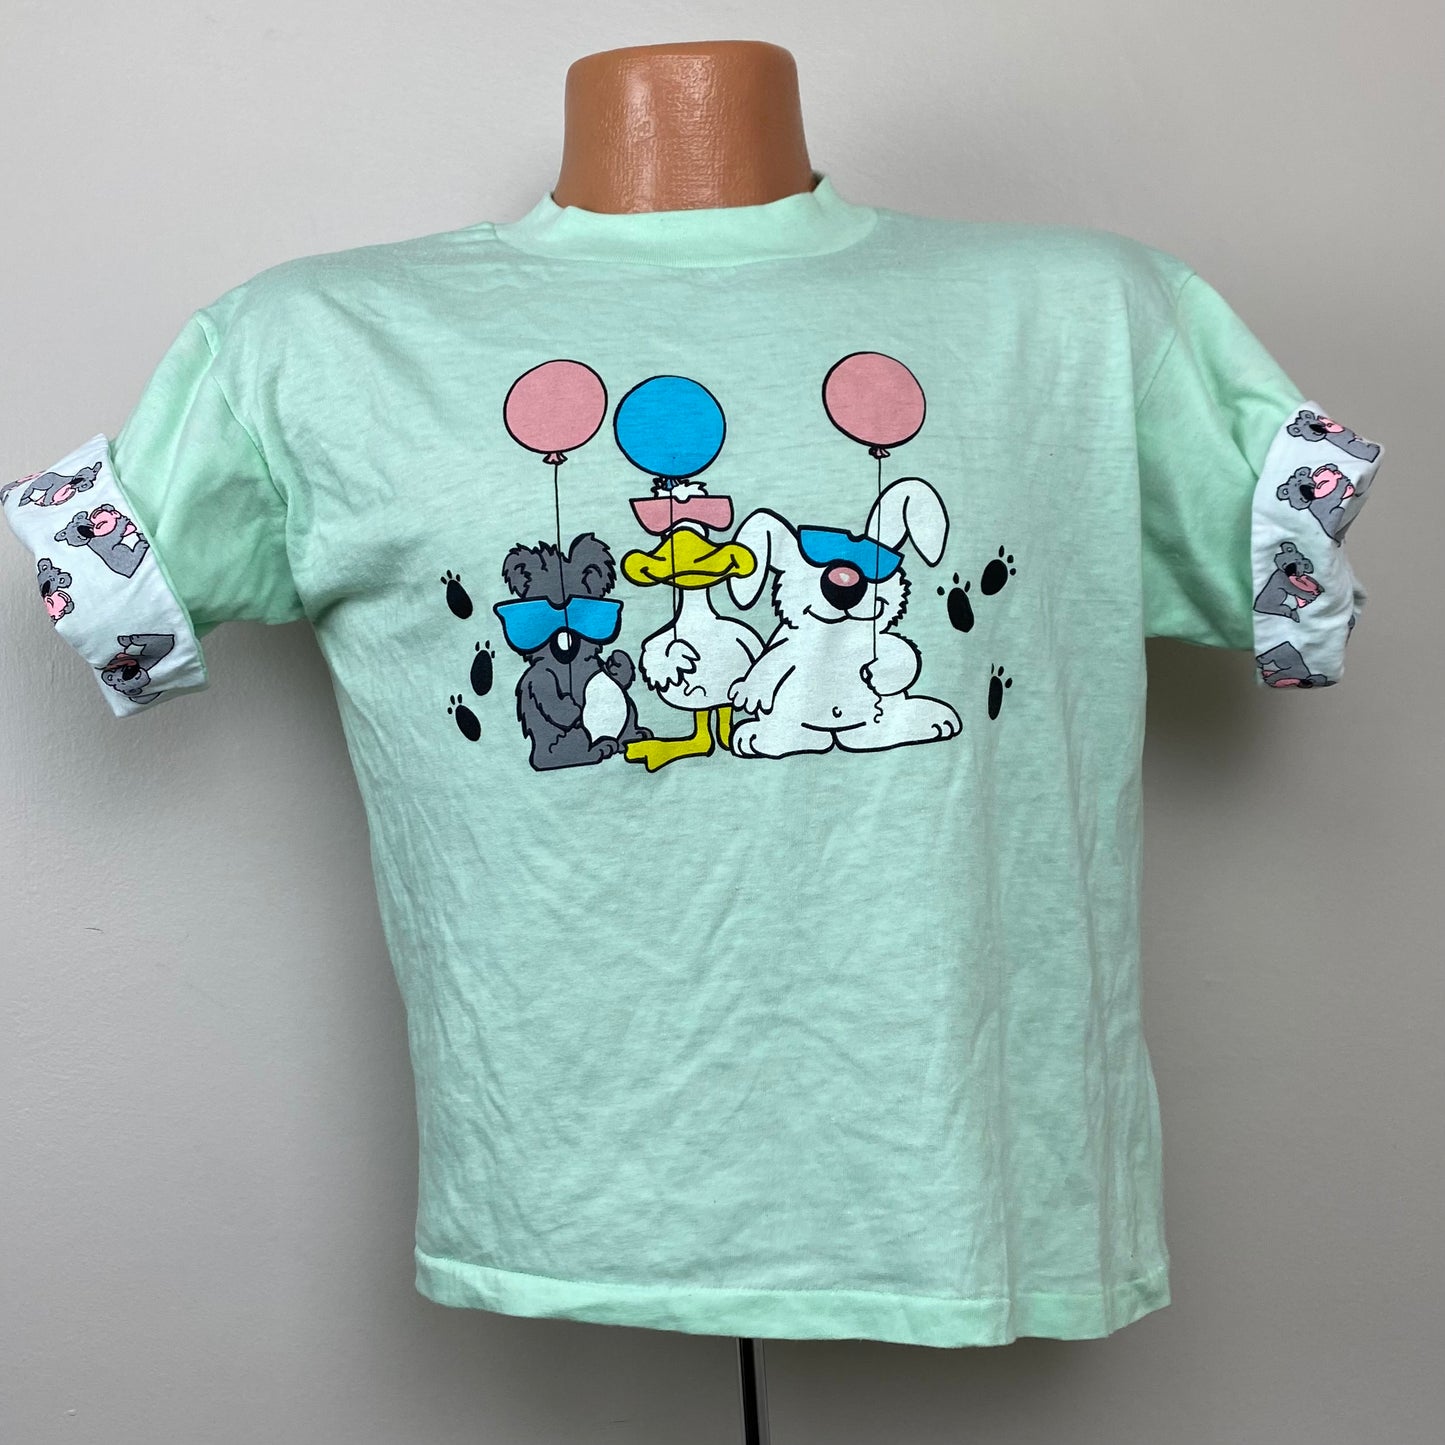 1980s Cutesy Cropped T-Shirt, Size Medium,Animals with Balloons, Mint Green